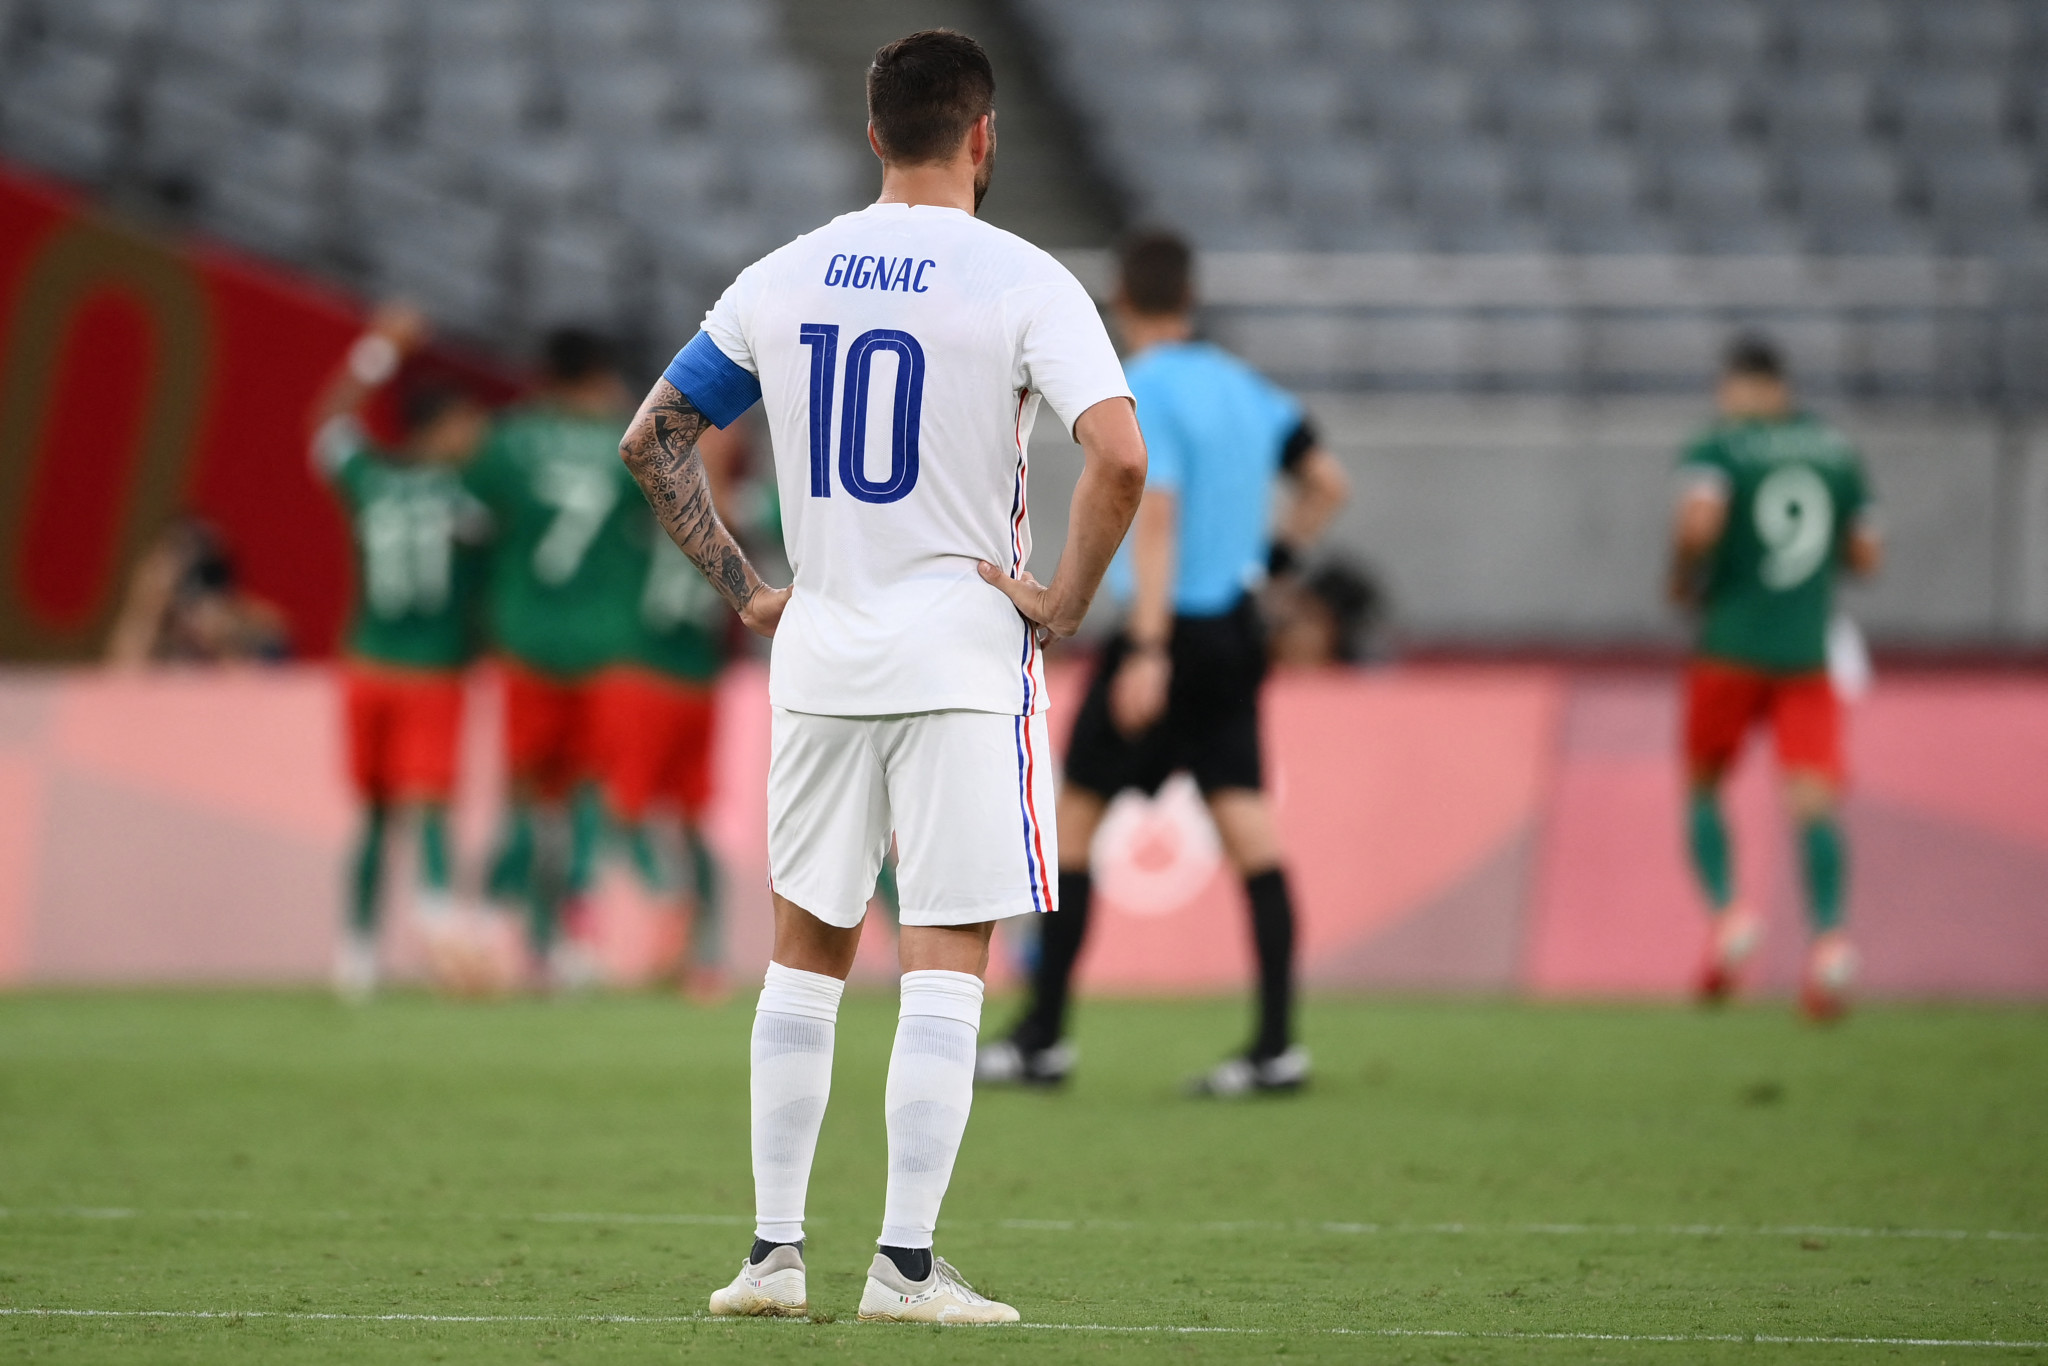 France's men were dumped out in the group stage at Tokyo 2020 after clubs blocked some players from appearing ©Getty Images